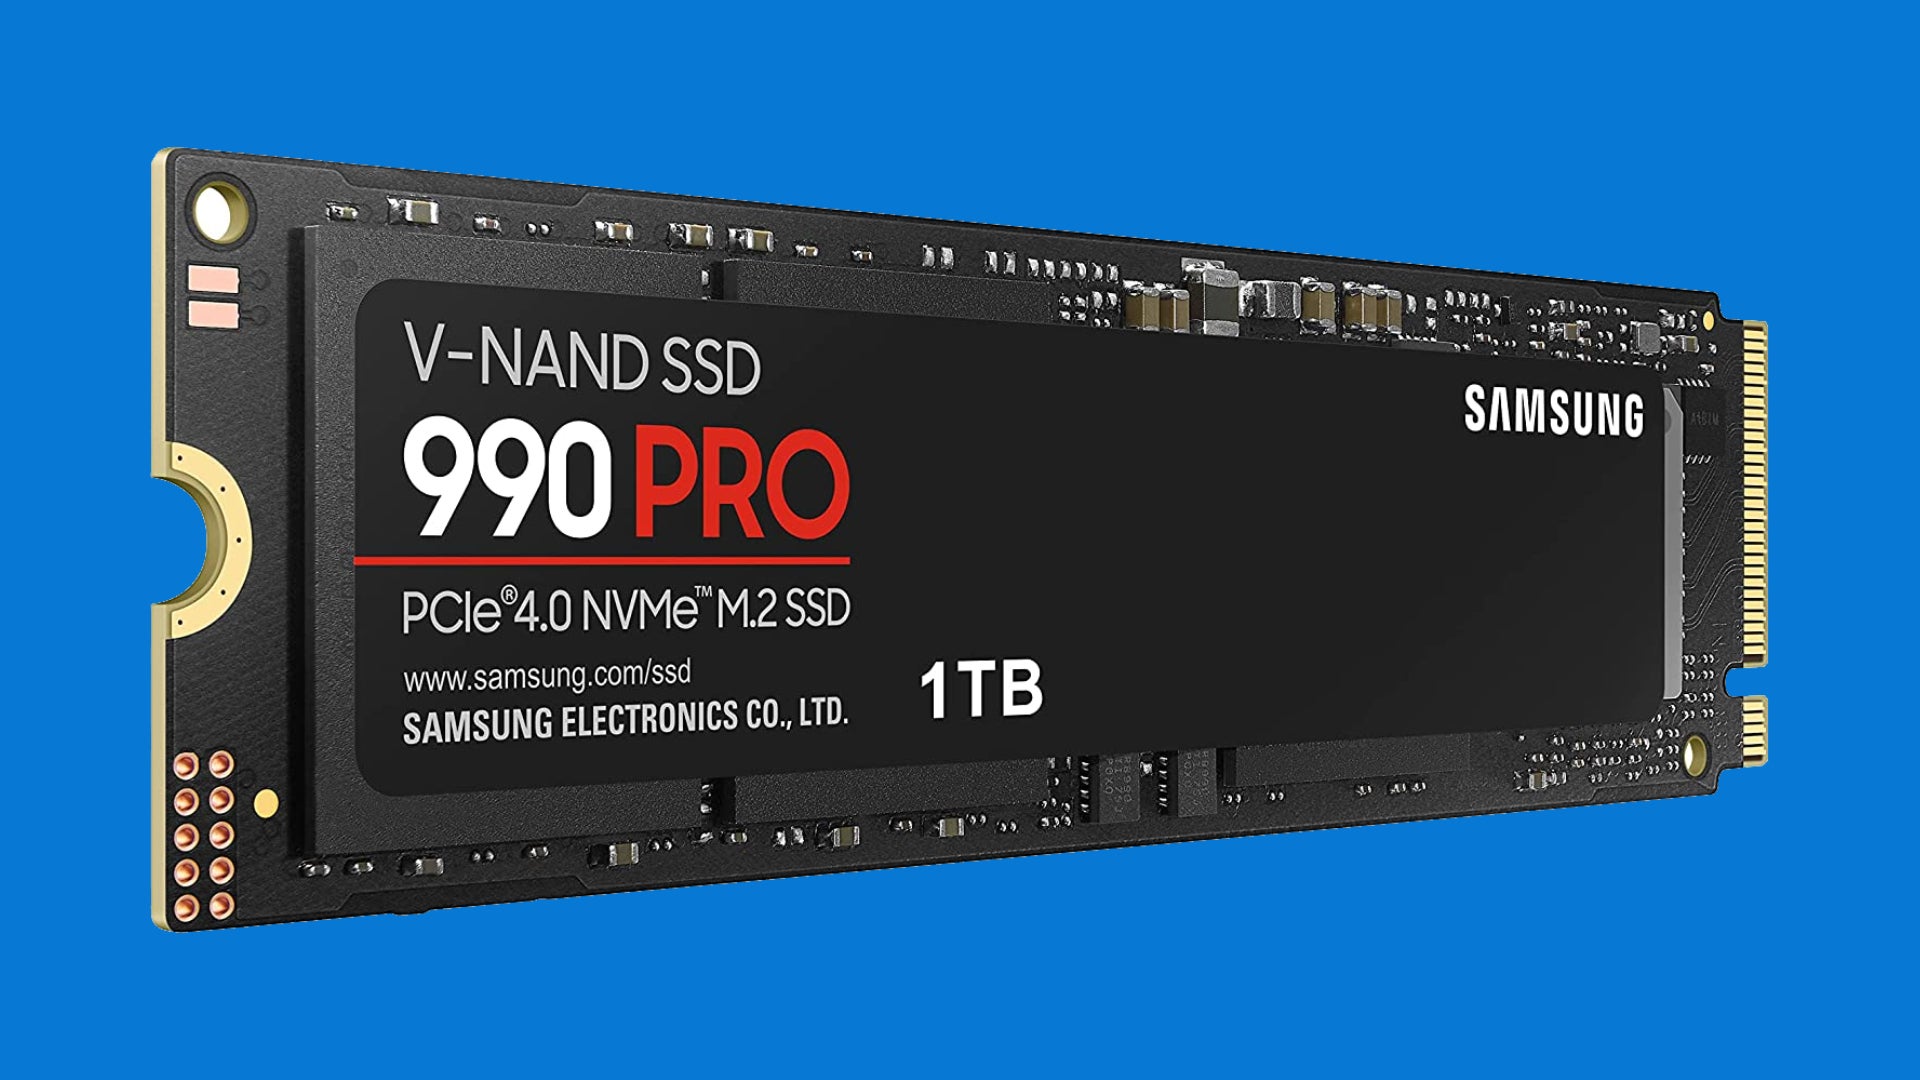 Samsung's speedy 990 Pro 1TB SSD has dropped to its lowest-ever